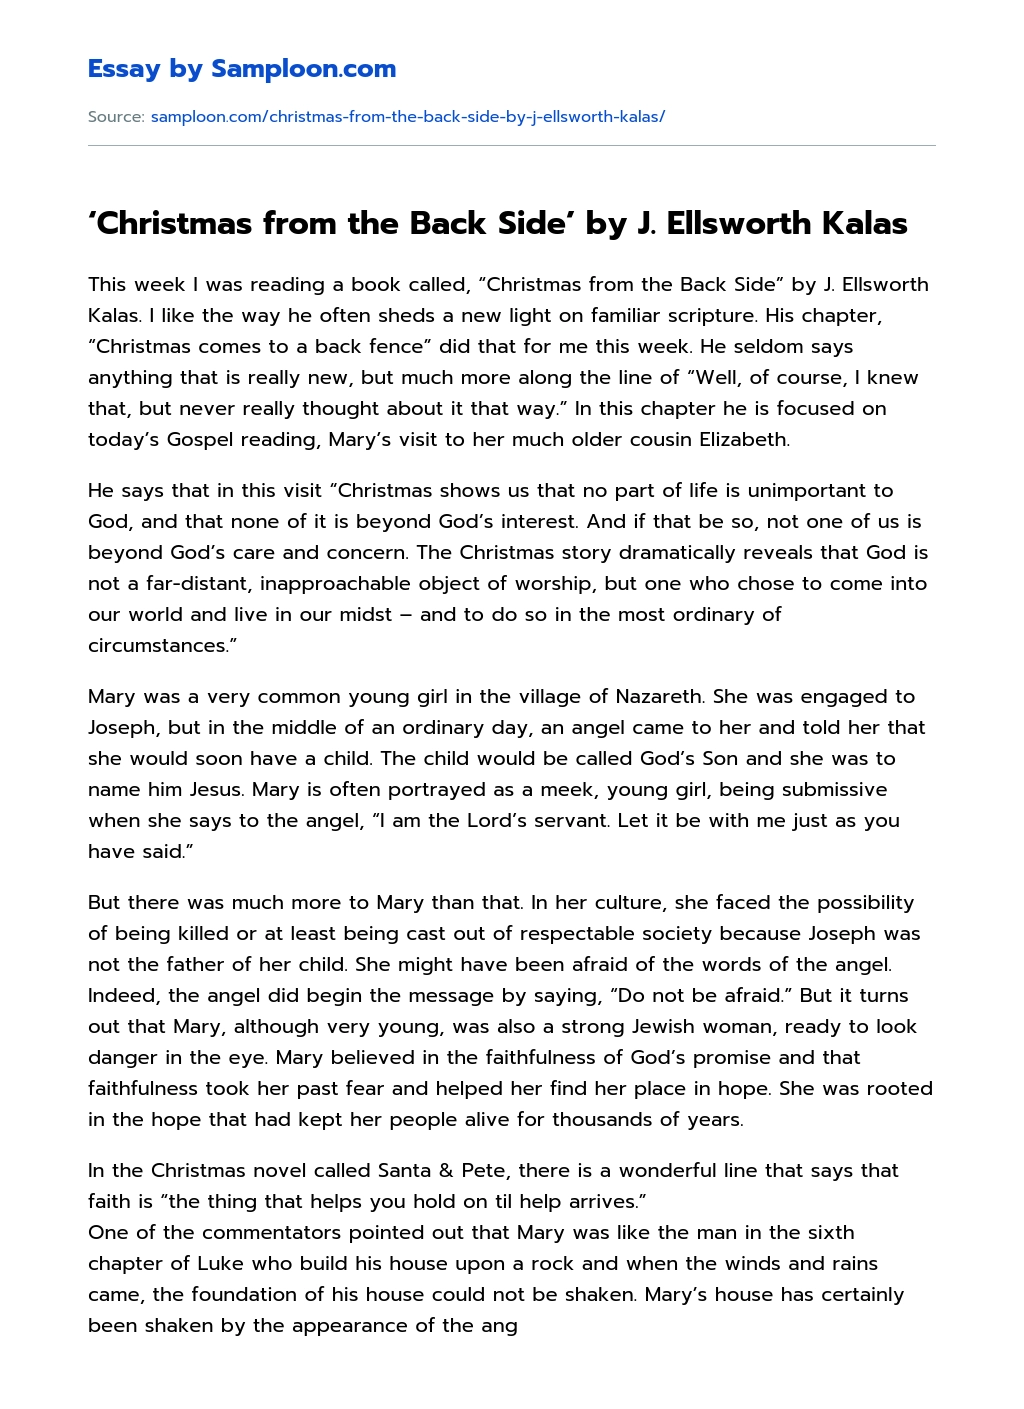 ‘Christmas from the Back Side’ by J. Ellsworth Kalas essay